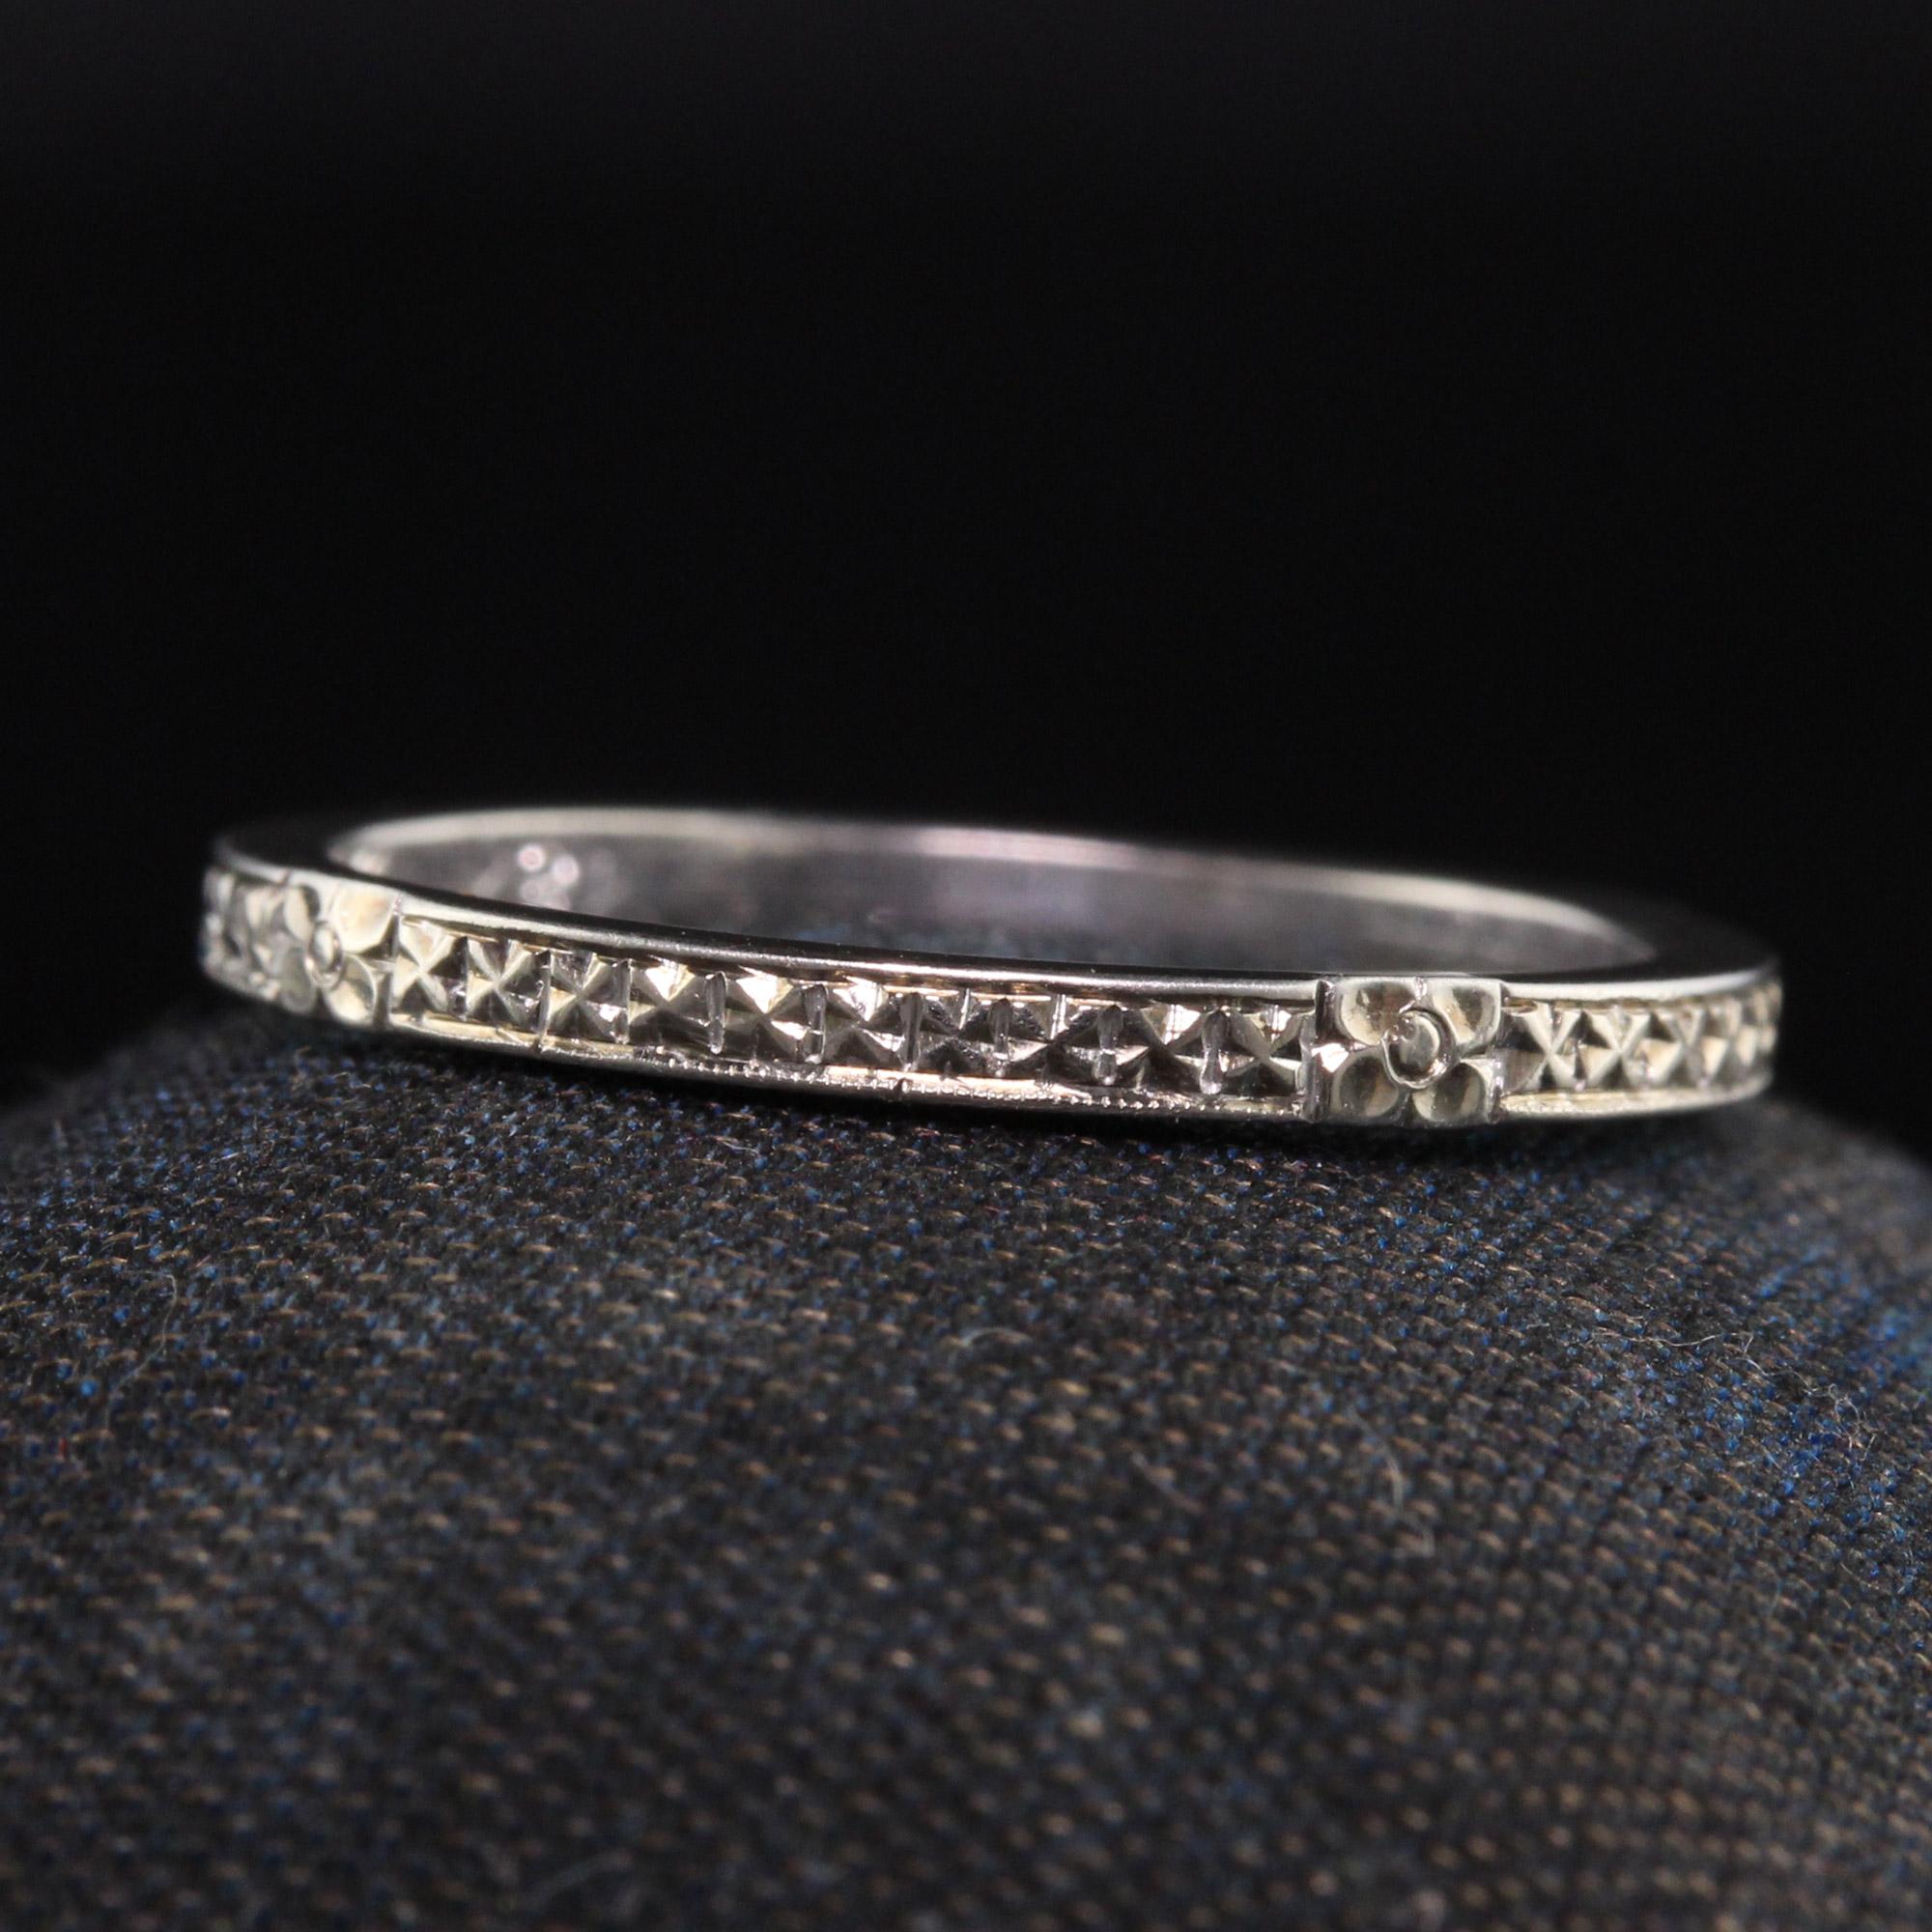 Beautiful Antique Art Deco 18K White Gold Engraved Wedding Band - Size 5 1/4. This pristine wedding band is engraved on both the top and inside of the band. The band is engraved 